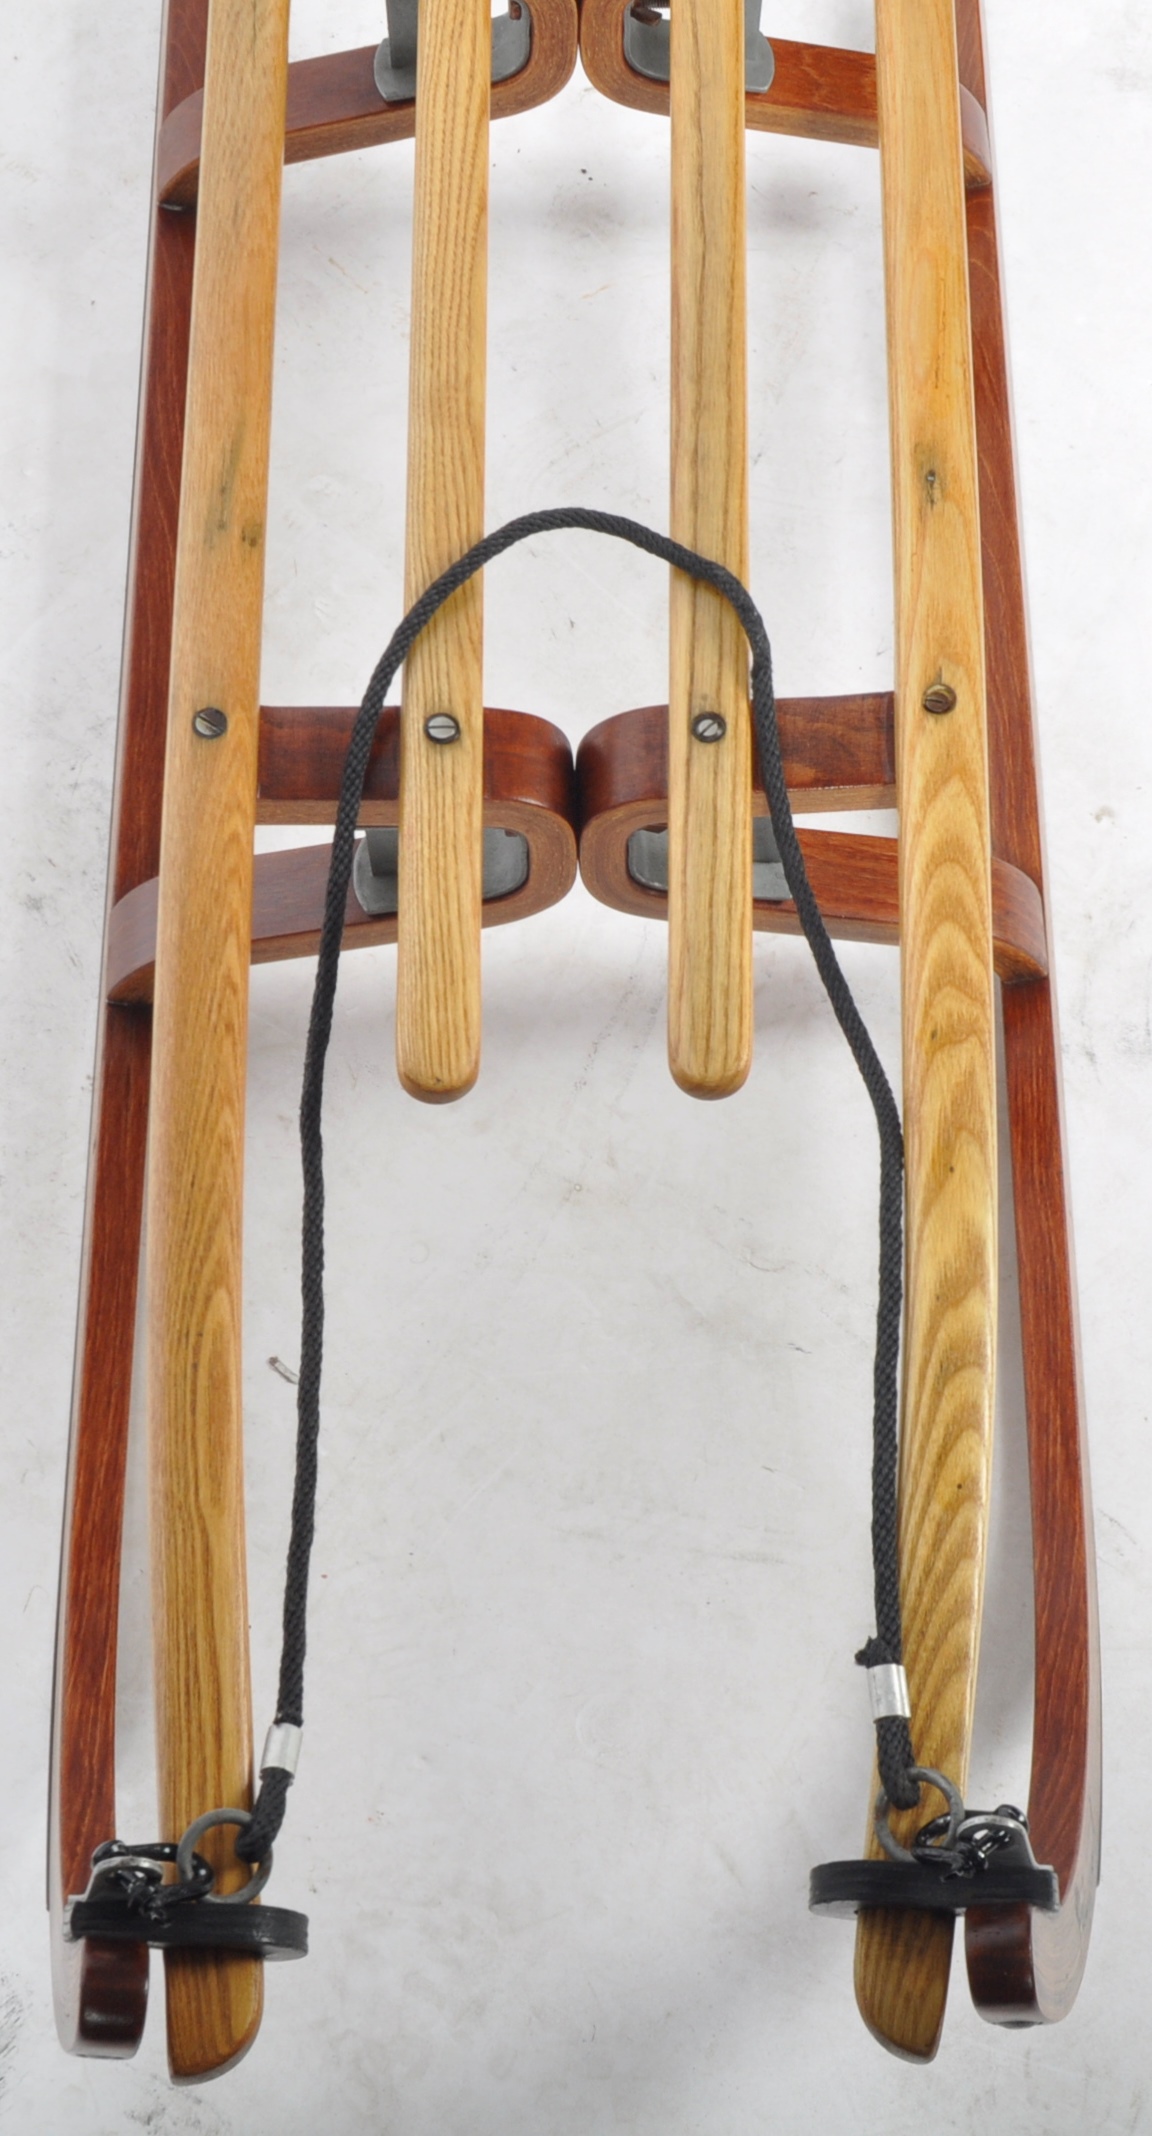 VINTAGE BENTWOOD AND OAK SLED / BOBSLEIGH BY PLAYCOMB - Image 3 of 5